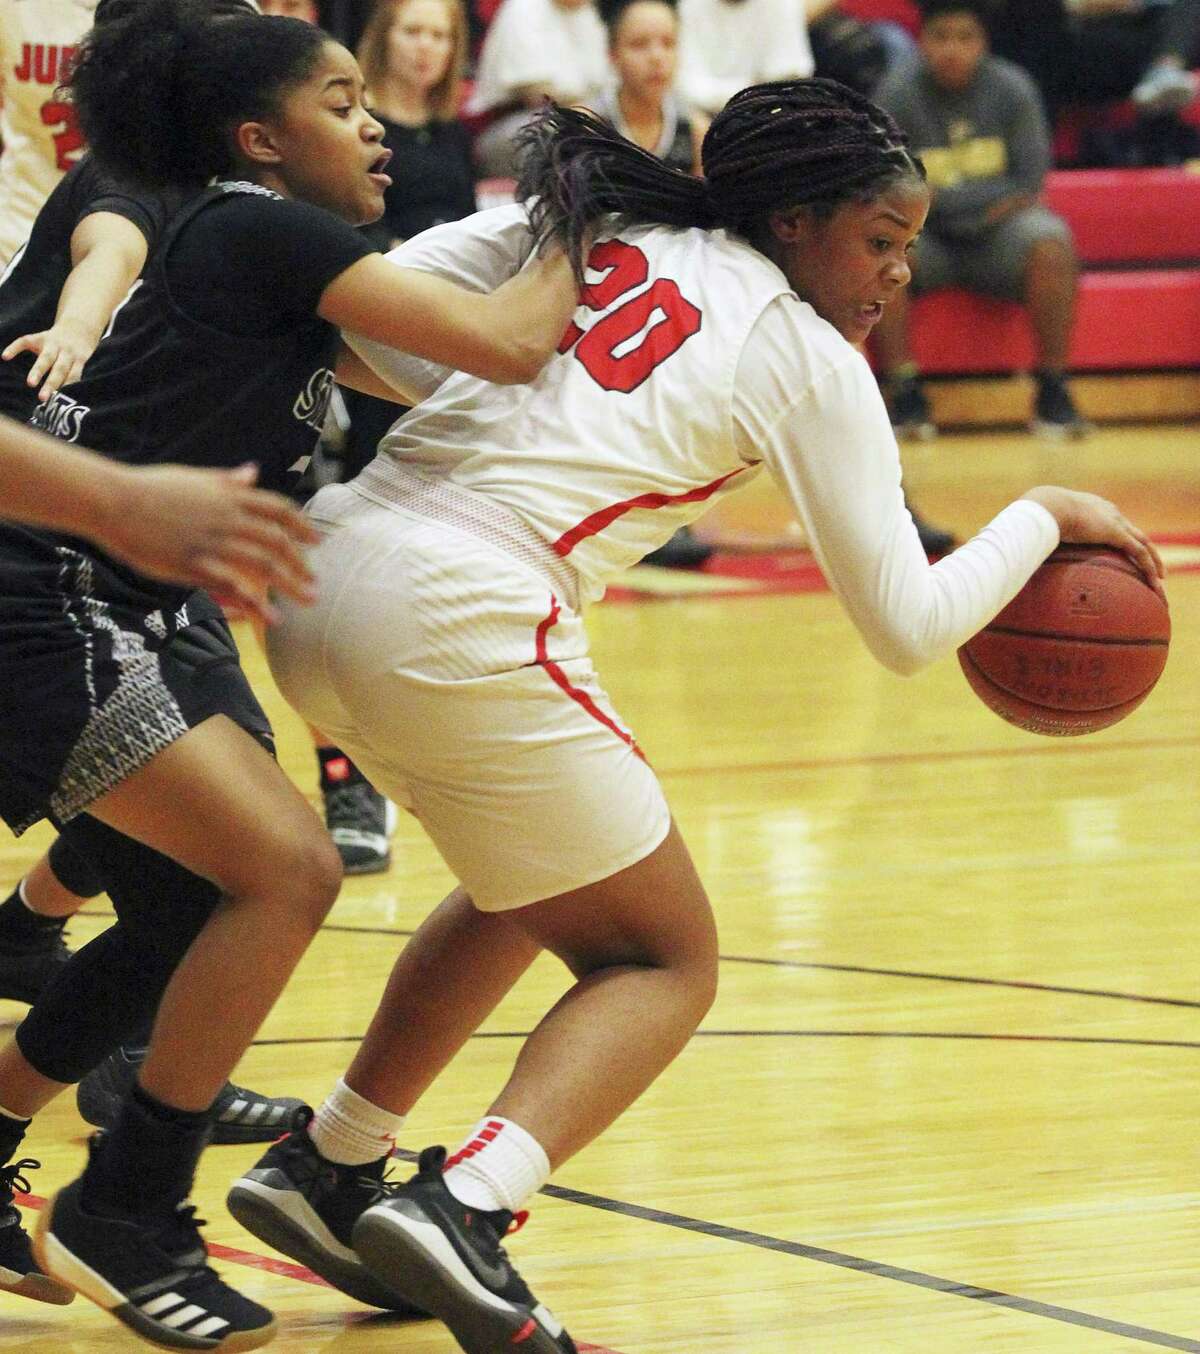 The Rocket's Kierra Sanderlin pivots at the top of the key on Bria McClure as Judson hosts Steele in girls basketball at Judson High School gym on January 22, 2019.